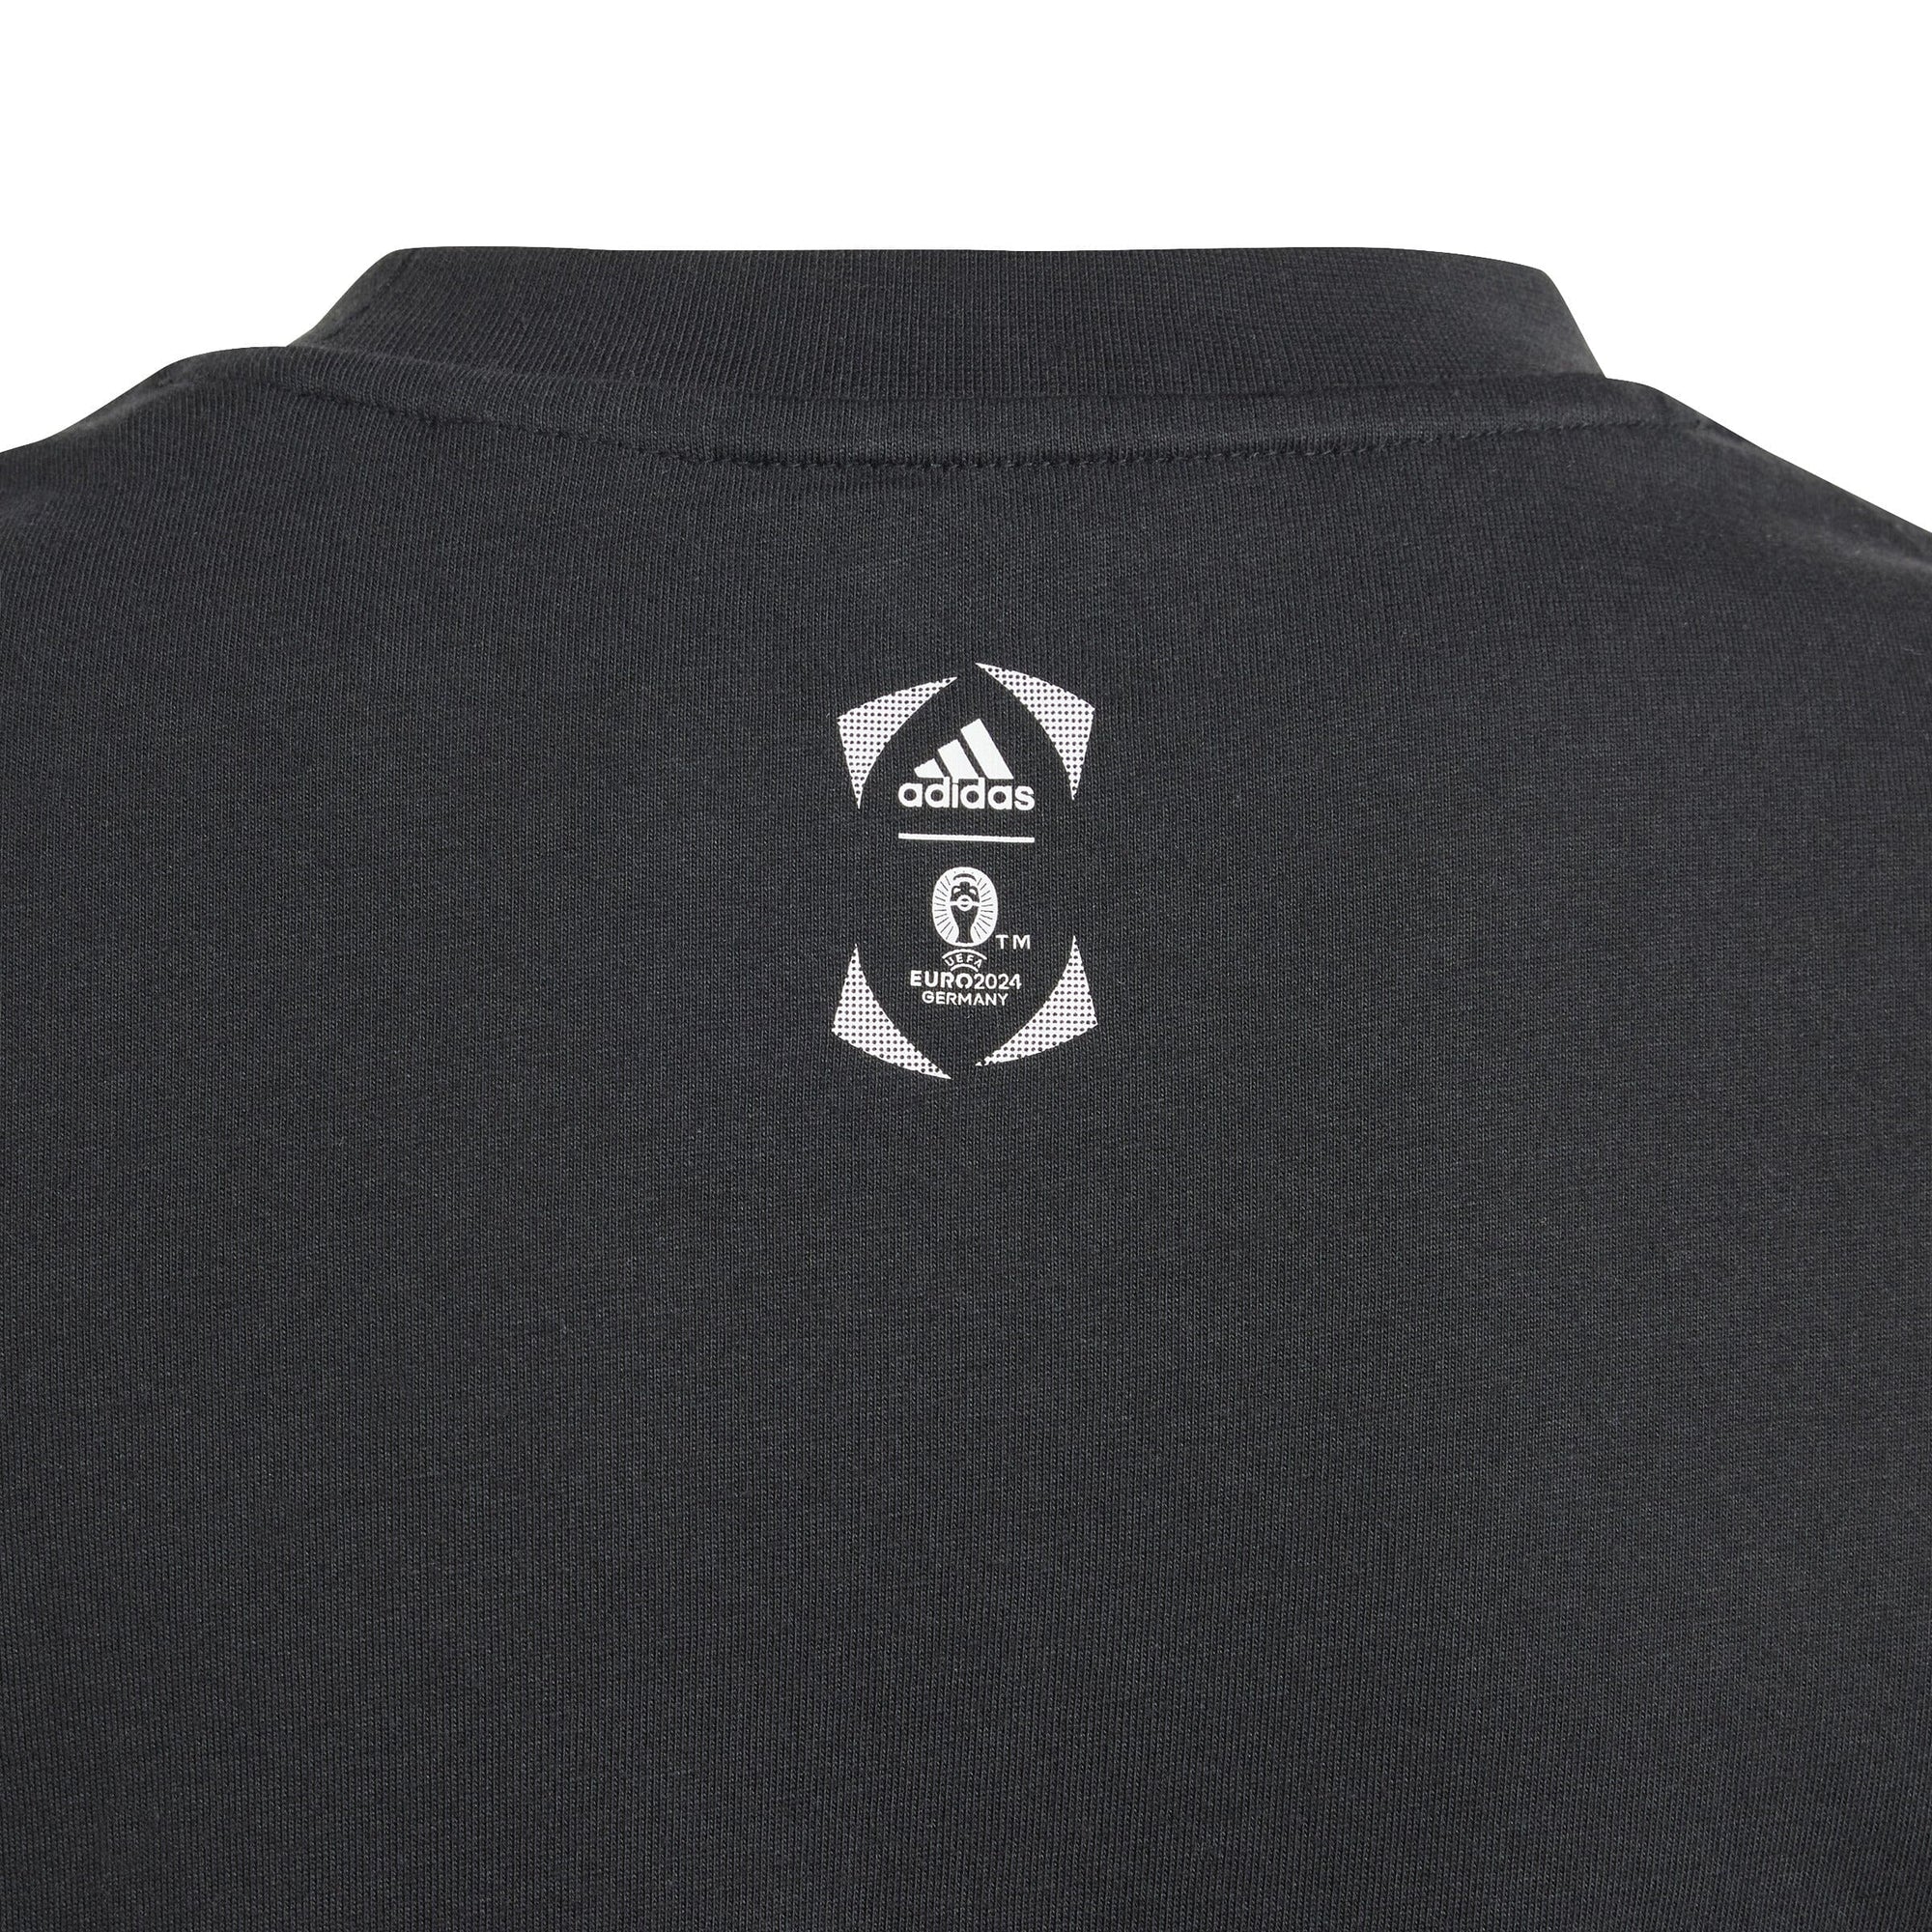 adidas Youth Official Emblem Tee | IT9307 Adidas 